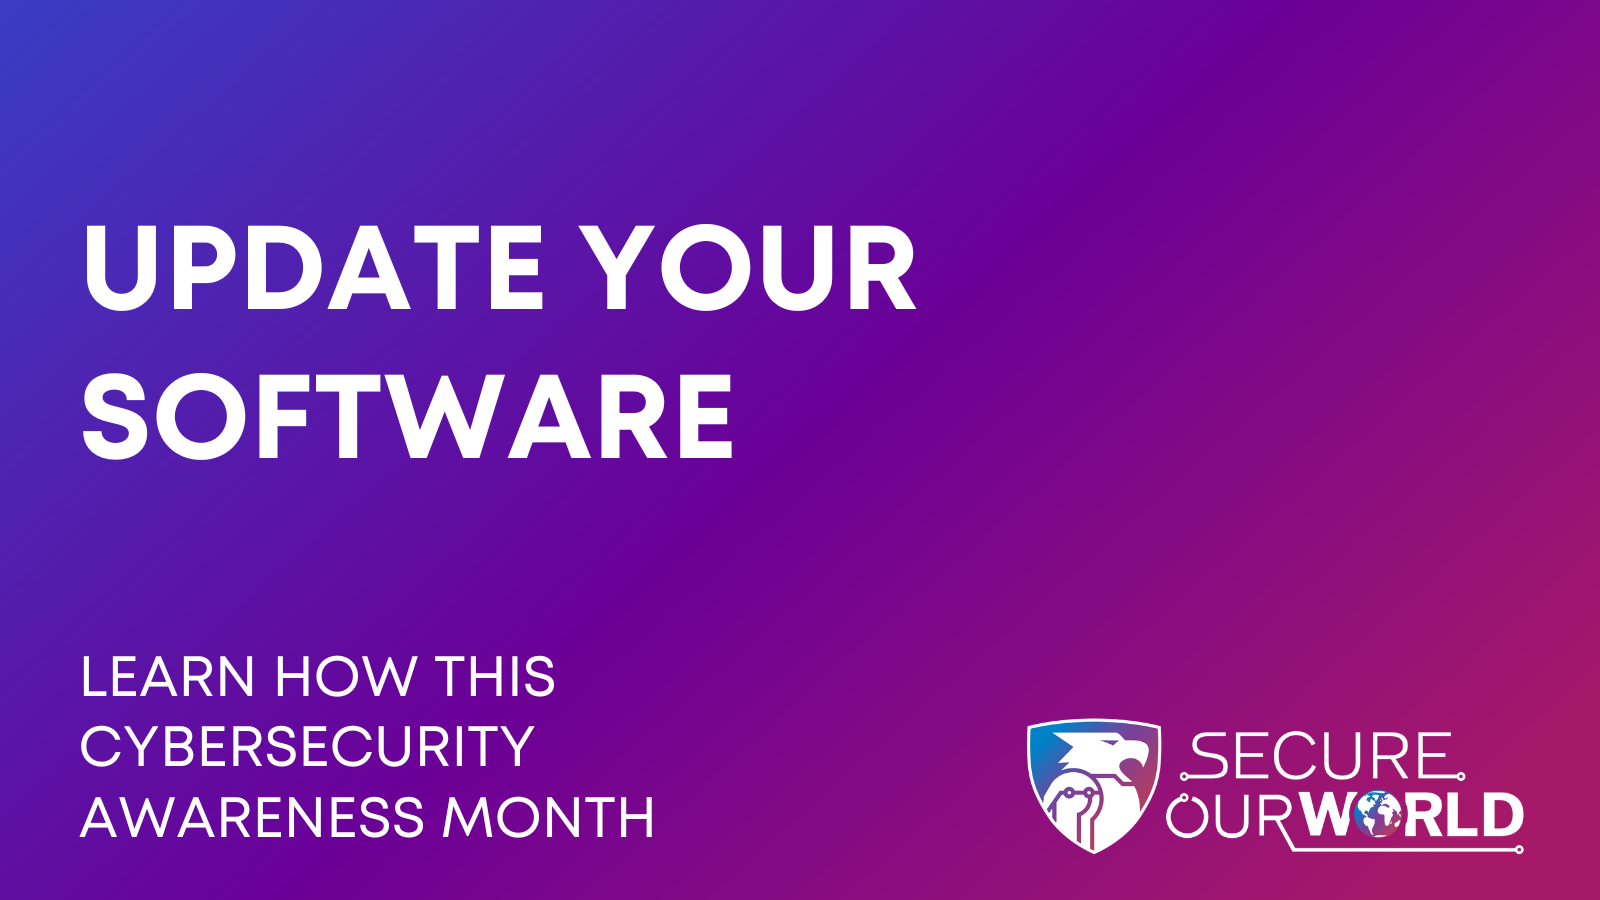 Update Your Software this Cybersecurity Awareness Month